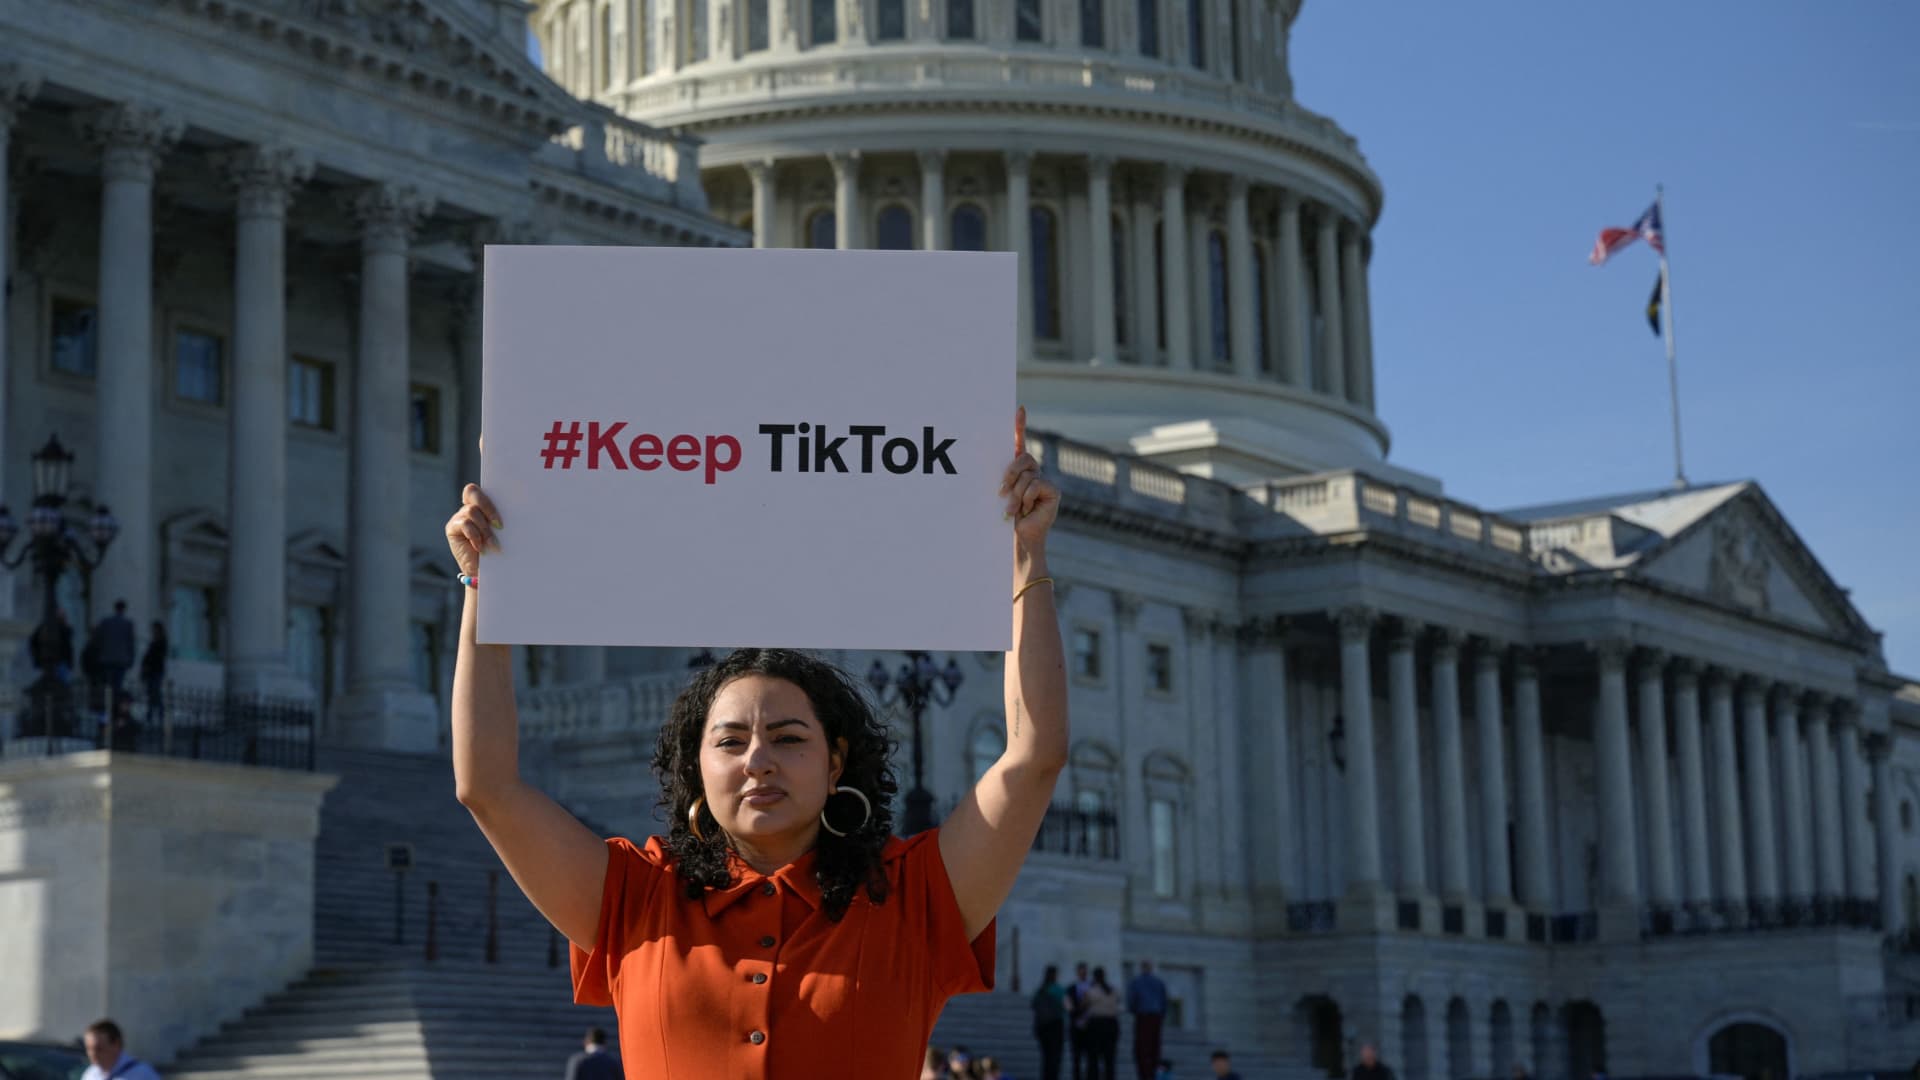 TikTok doubles ad aquire to fight ability U.S. ban as Congress moves to posthaste-tune regulations